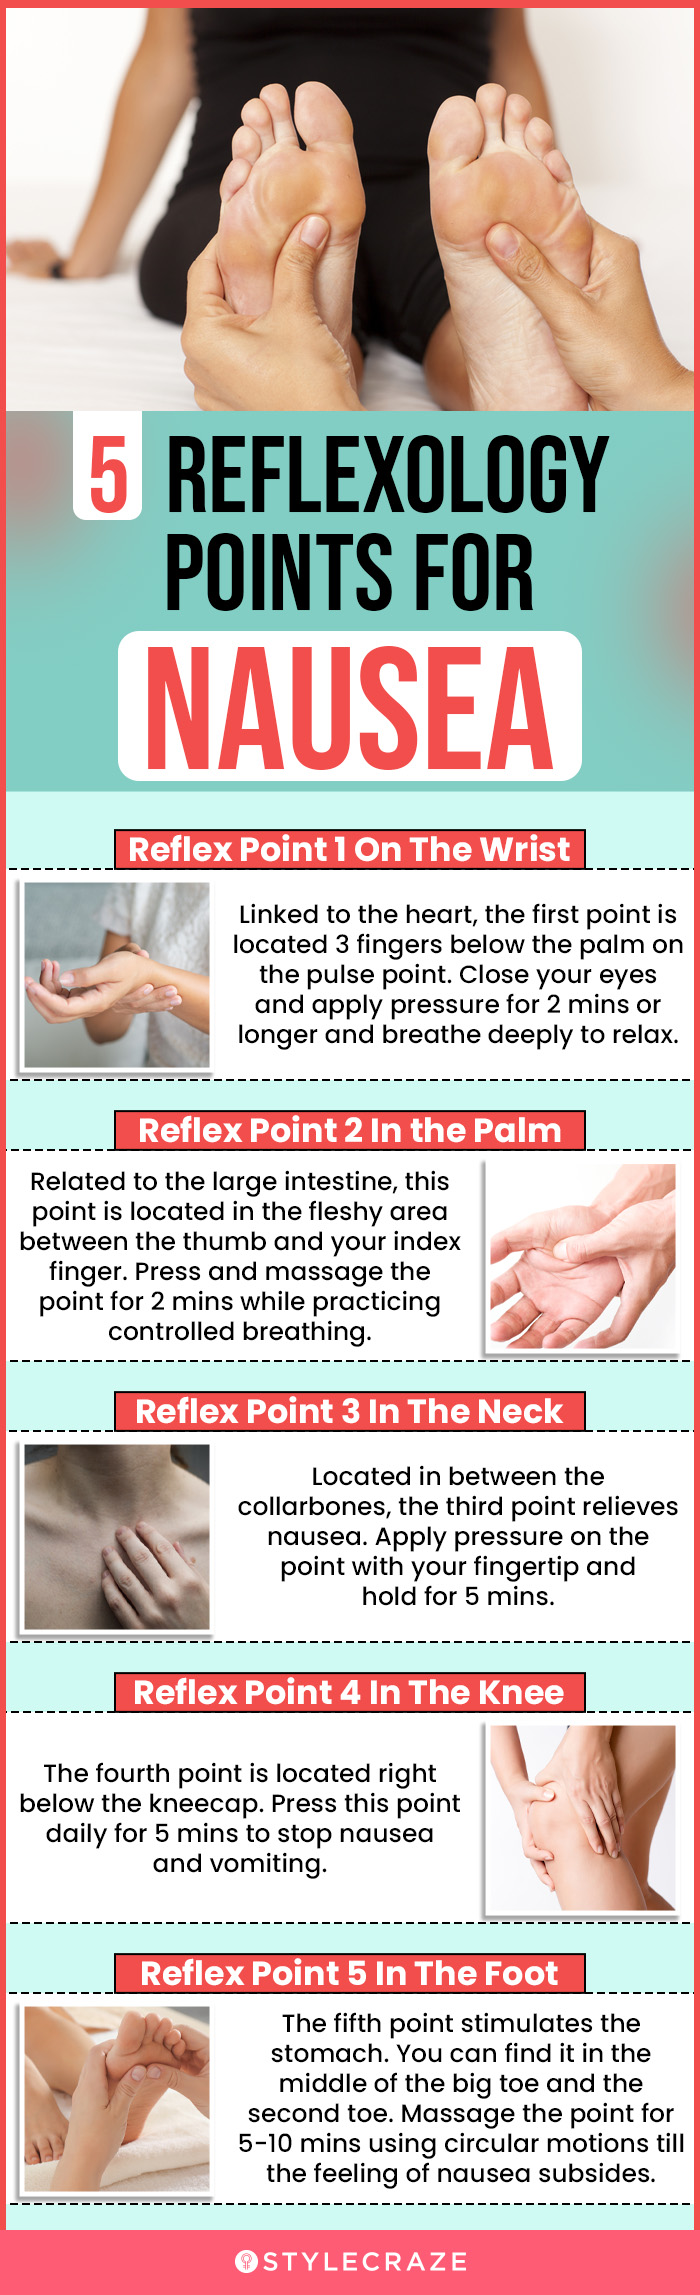 How To Stop Nausea With Reflexology?